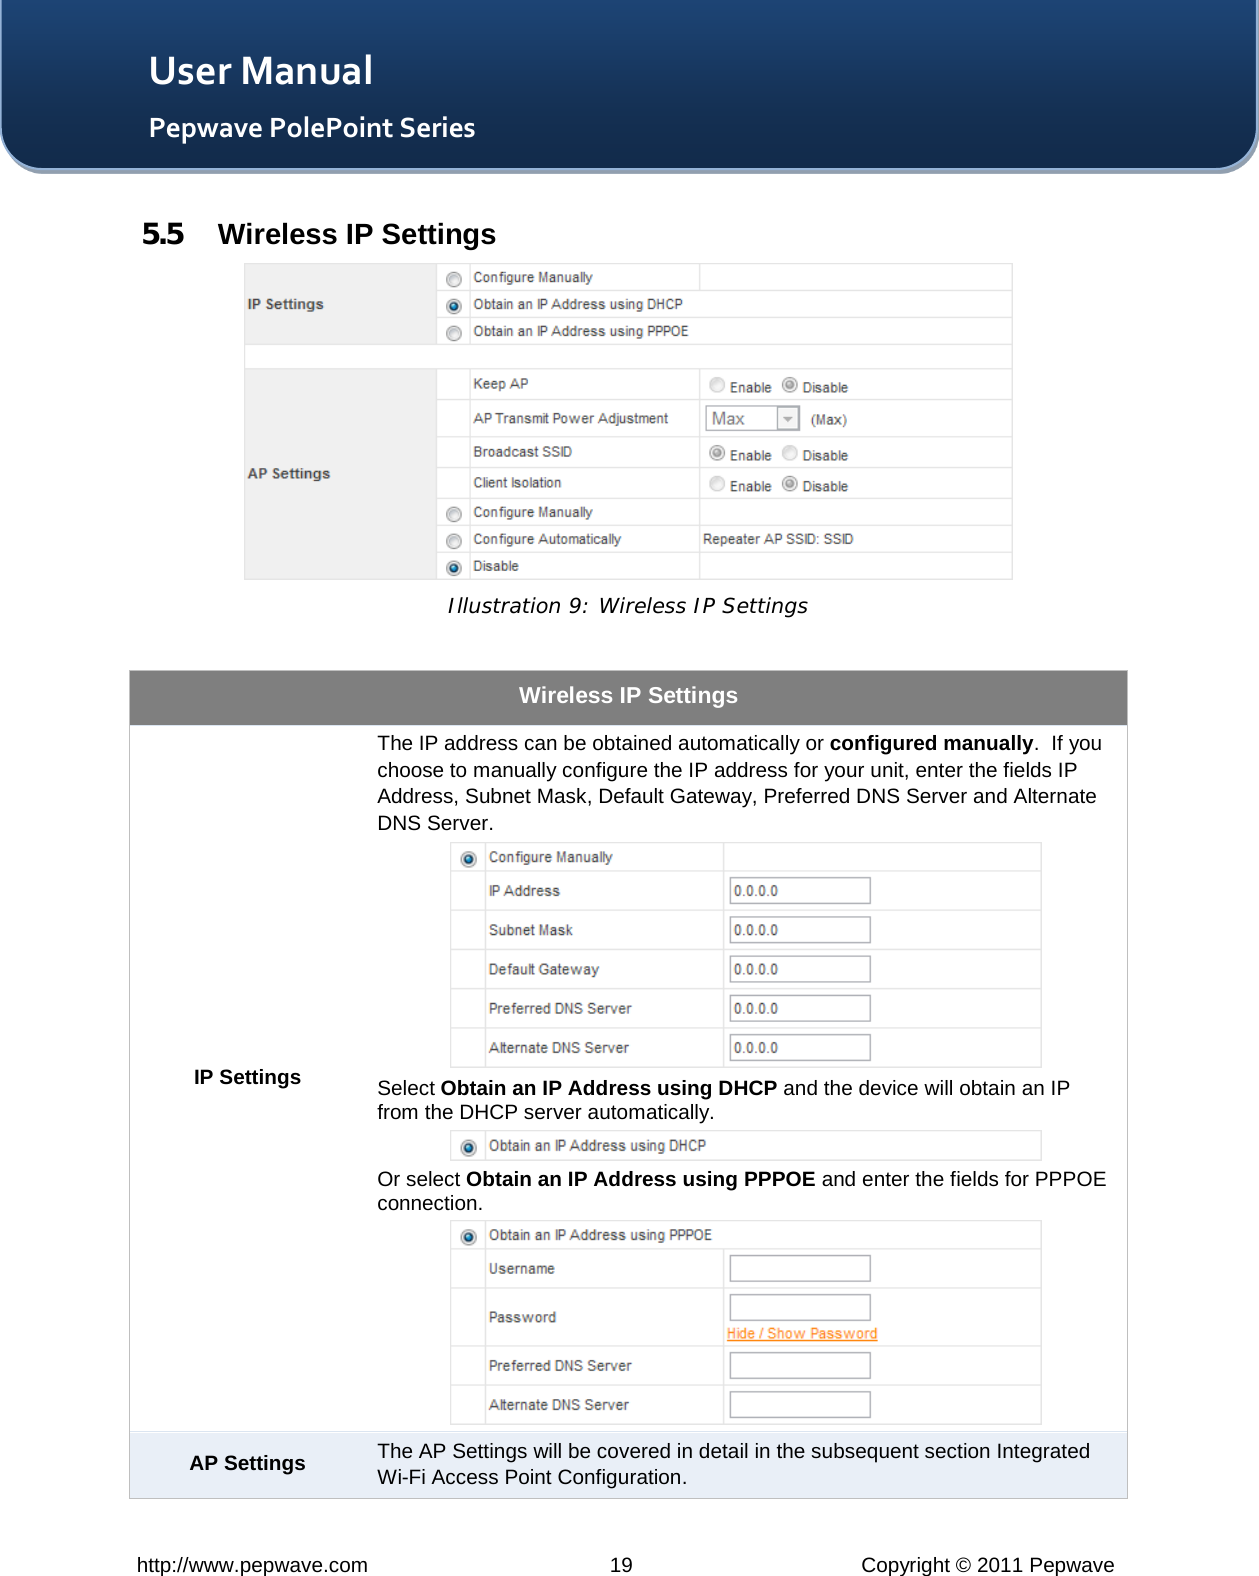   http://www.pepwave.com 19 Copyright © 2011 Pepwave   User Manual Pepwave PolePoint Series 5.5 Wireless IP Settings  Illustration 9: Wireless IP Settings  Wireless IP Settings IP Settings The IP address can be obtained automatically or configured manually.  If you choose to manually configure the IP address for your unit, enter the fields IP Address, Subnet Mask, Default Gateway, Preferred DNS Server and Alternate DNS Server.  Select Obtain an IP Address using DHCP and the device will obtain an IP from the DHCP server automatically.  Or select Obtain an IP Address using PPPOE and enter the fields for PPPOE connection.  AP Settings The AP Settings will be covered in detail in the subsequent section Integrated Wi-Fi Access Point Configuration. 